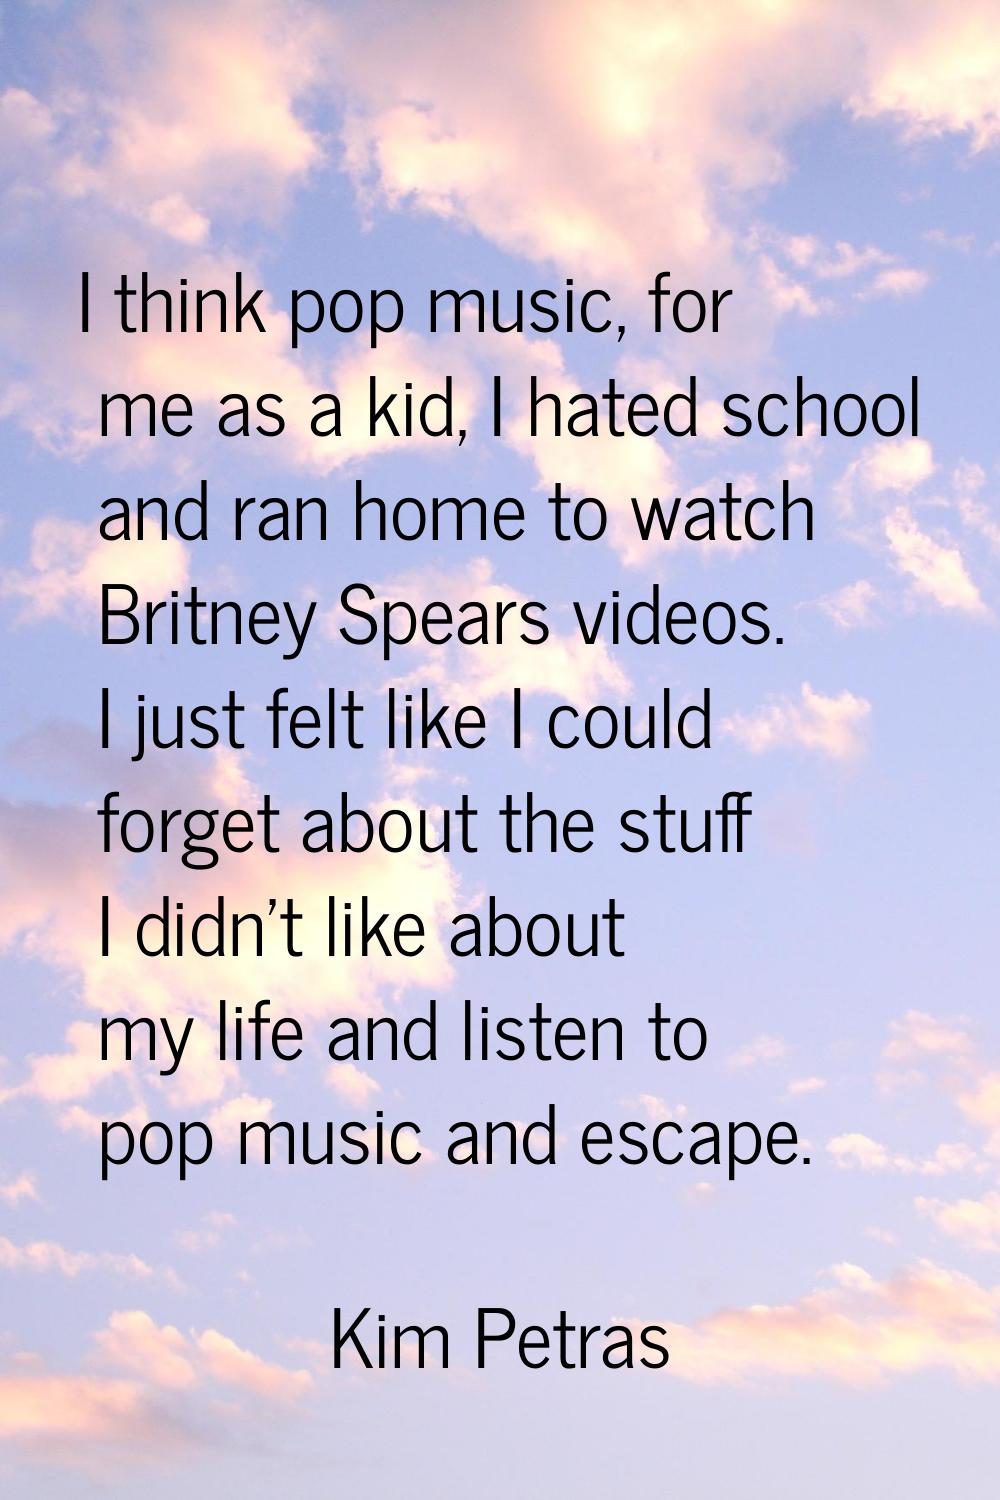 I think pop music, for me as a kid, I hated school and ran home to watch Britney Spears videos. I j